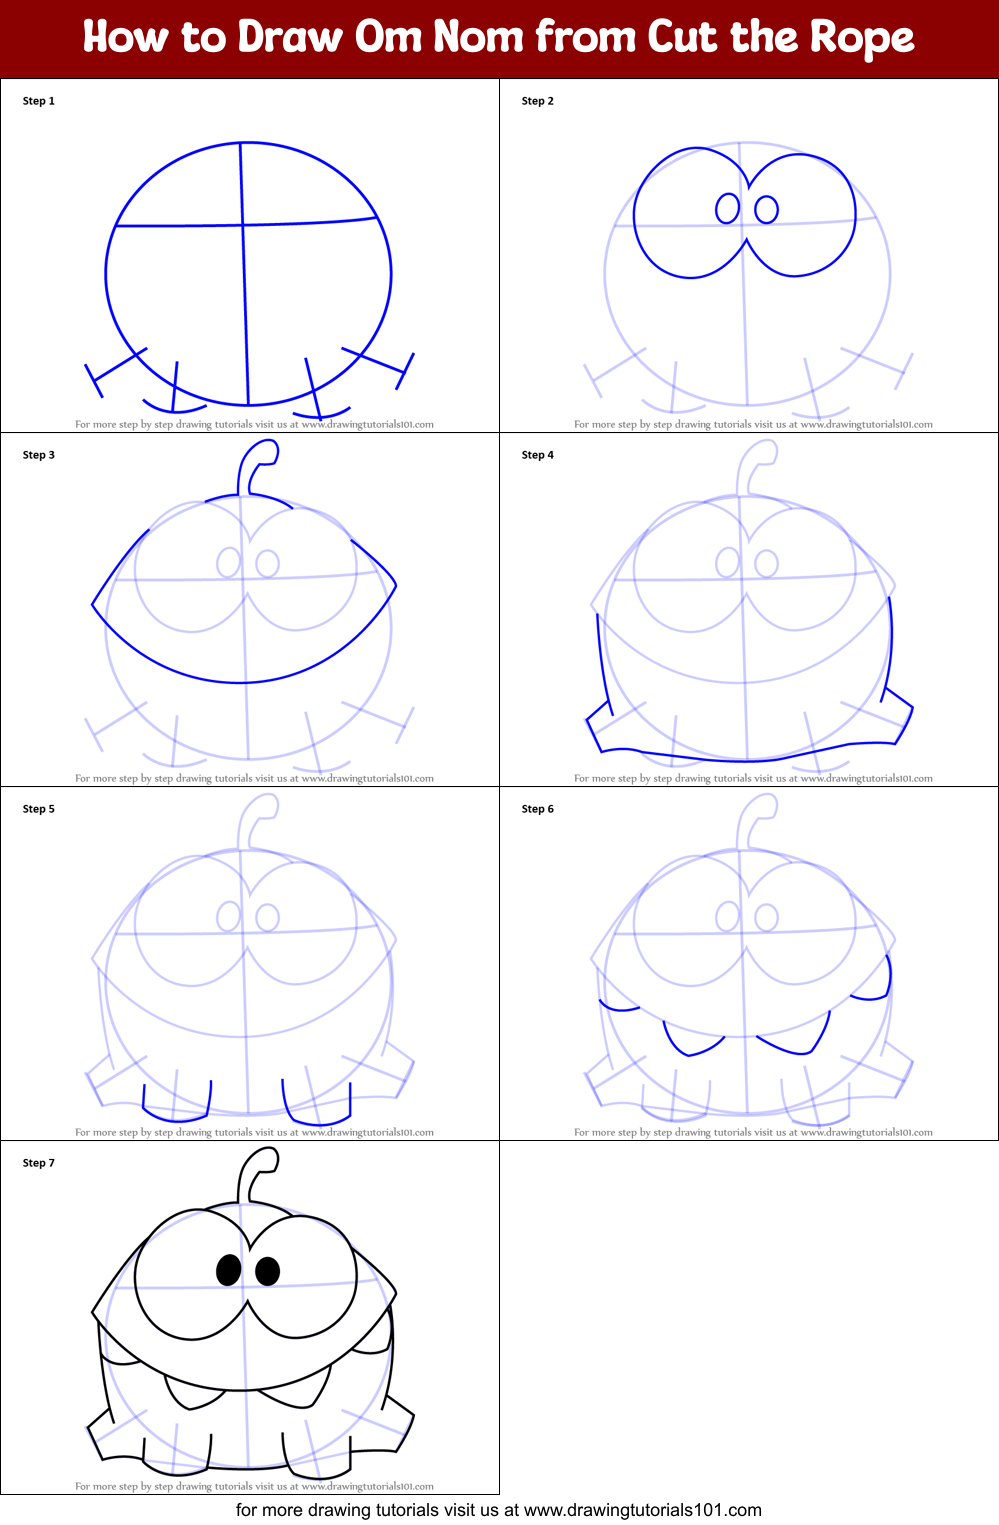 How to Draw Om Nom from Cut the Rope printable step by step drawing